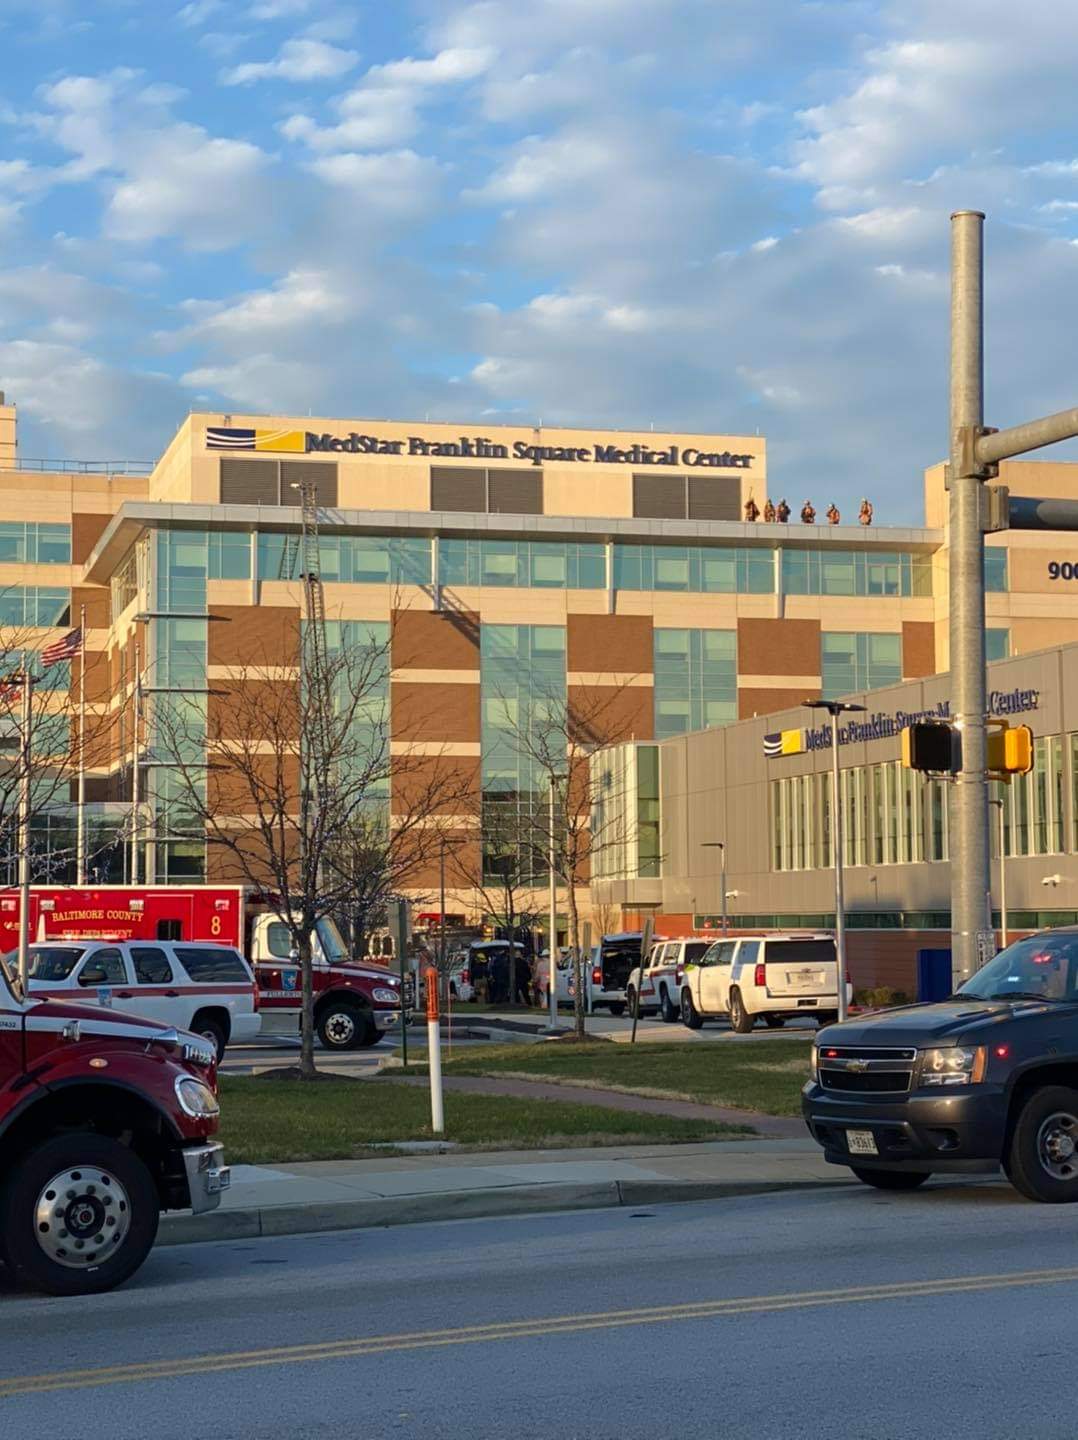 Trash Room Fire Reported at Franklin Square Medical